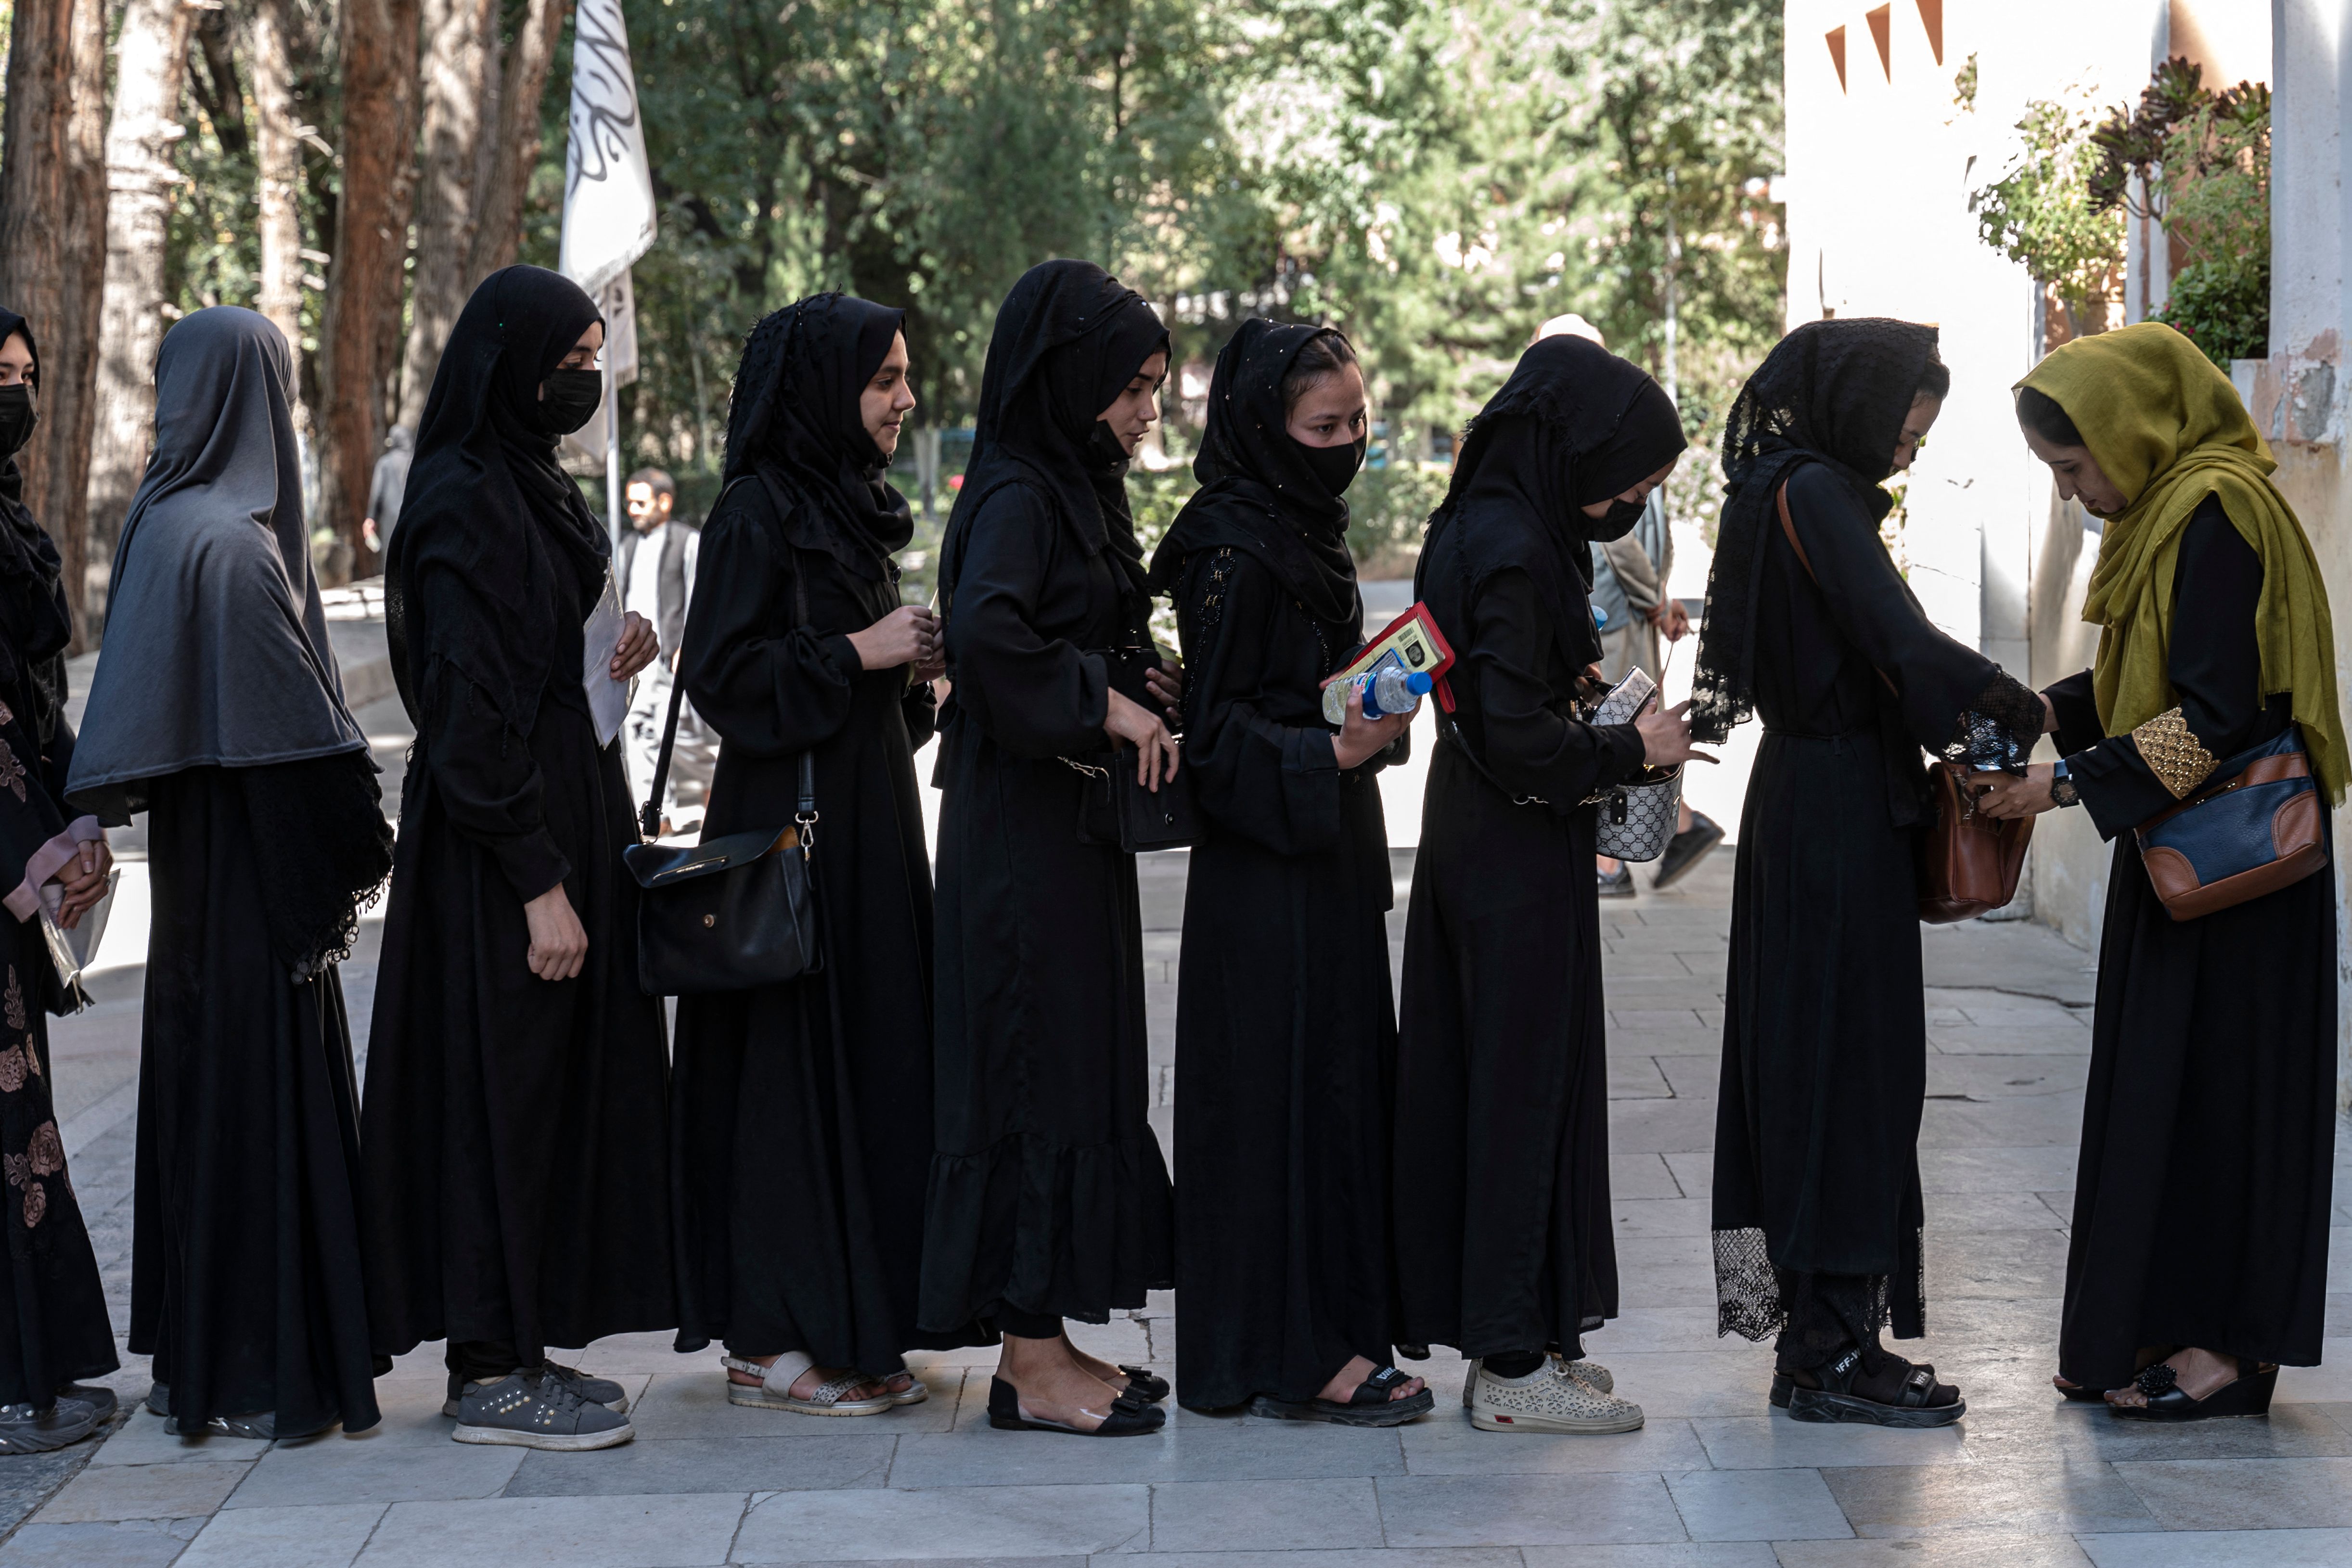 Female students arrive&nbsp;for entrance exams at the Kabul University on October 13.&nbsp;